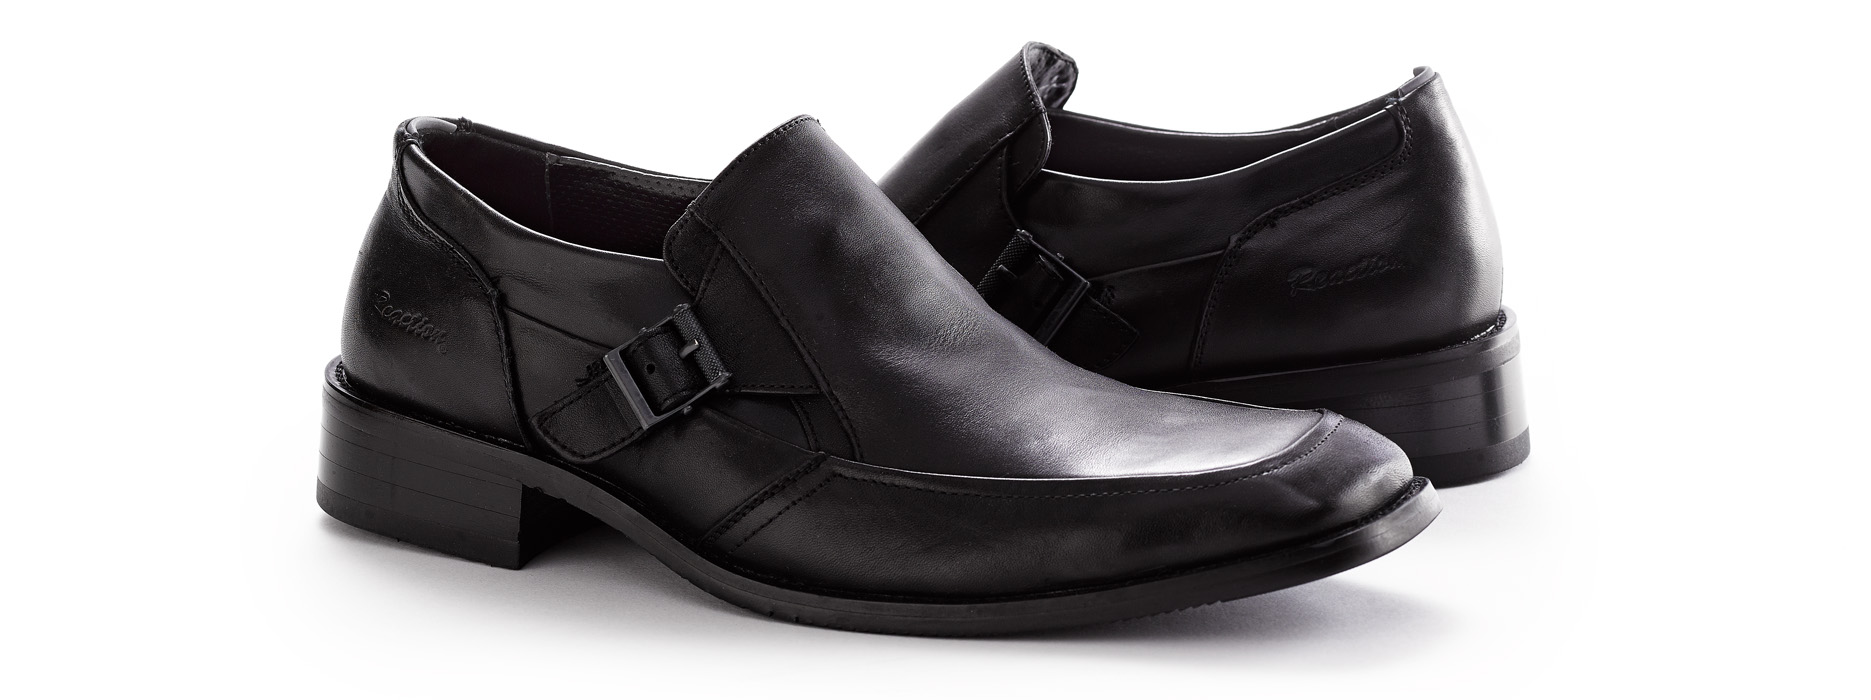 Kenneth Cole Shoes.jpg